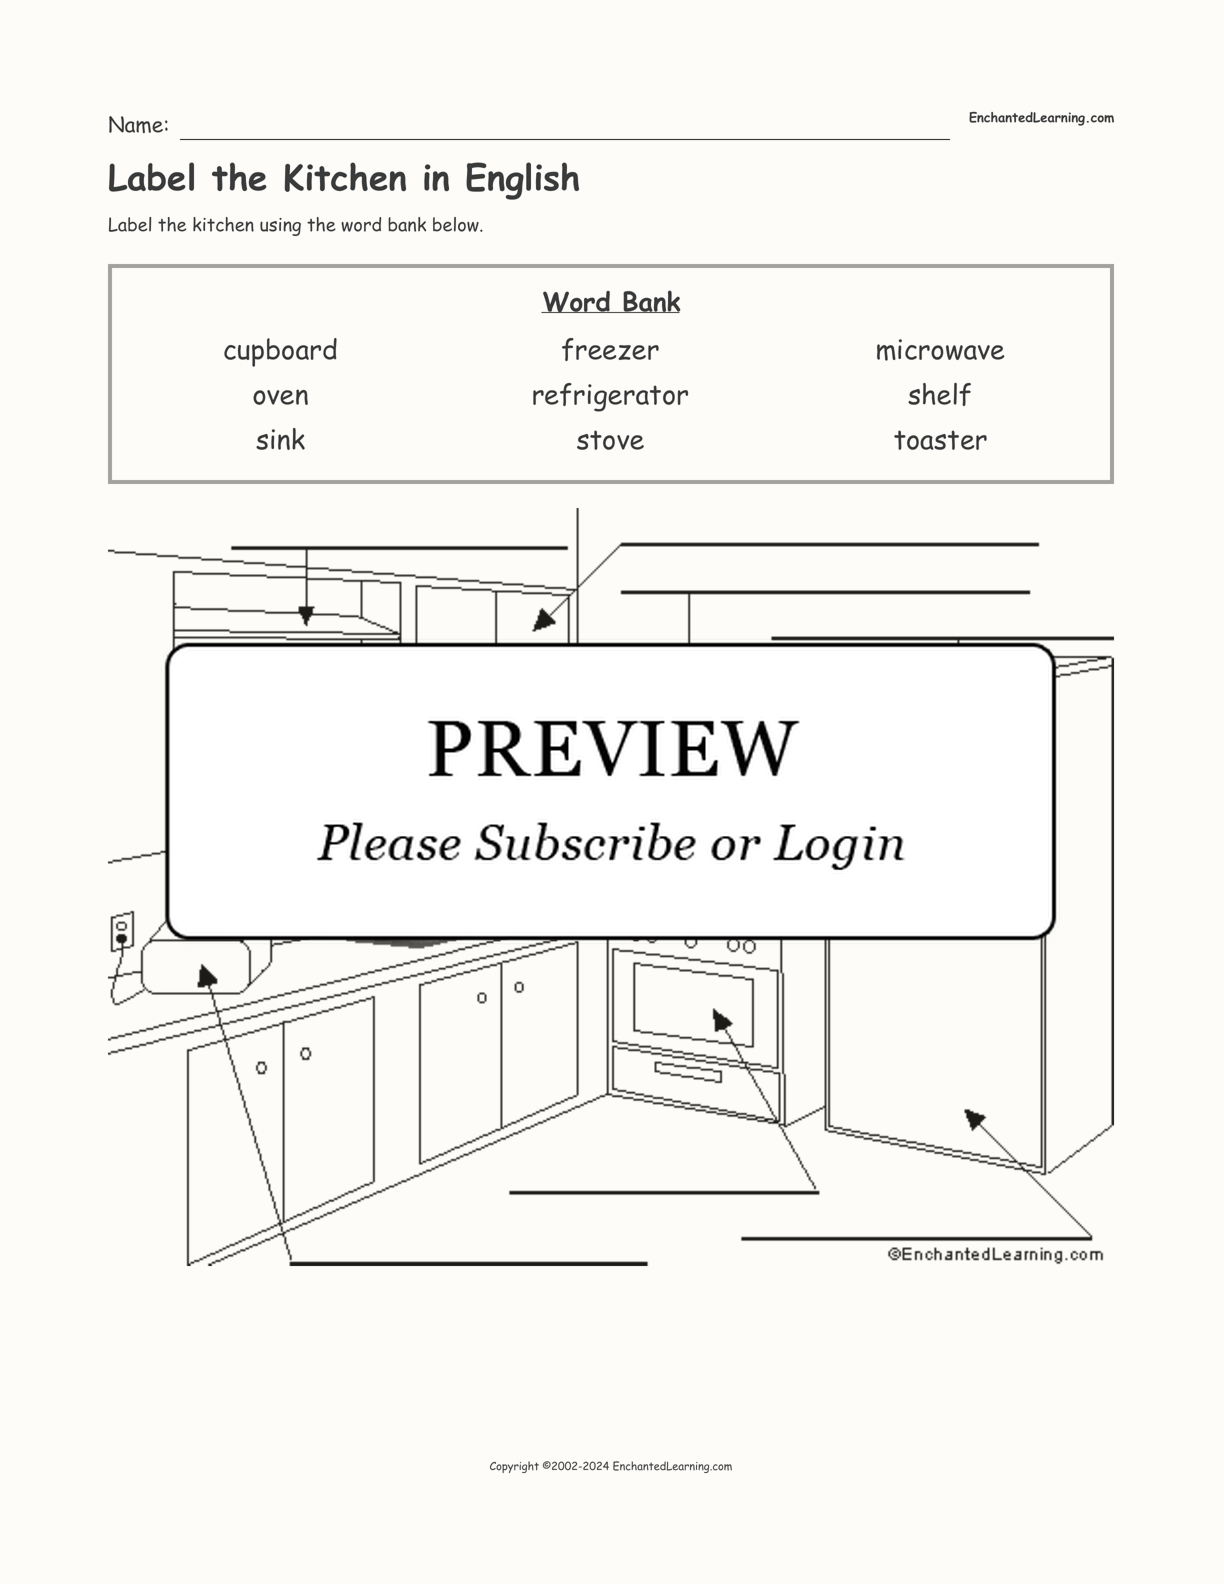 Label the Kitchen in English interactive worksheet page 1